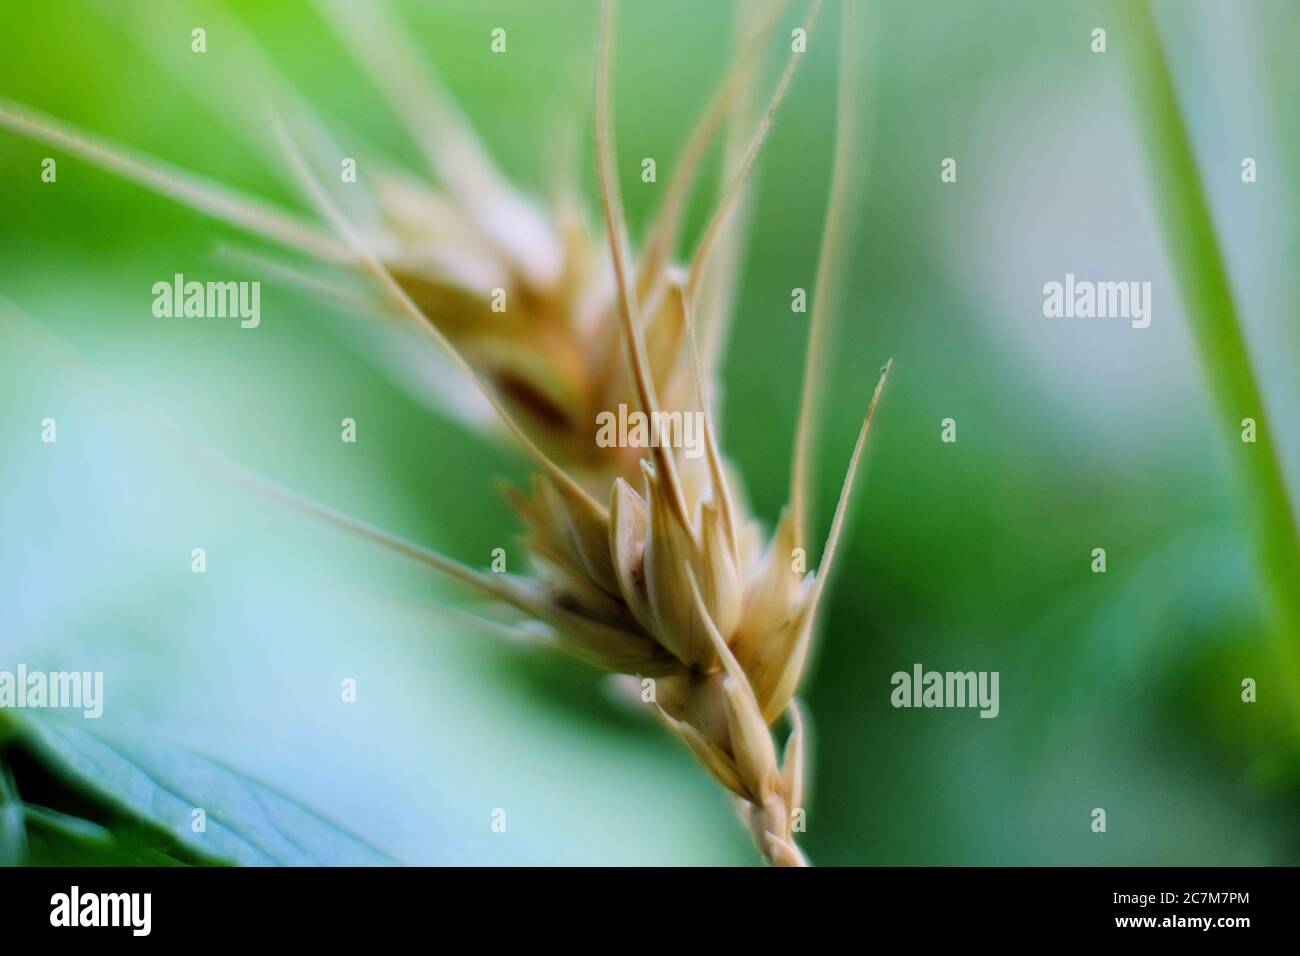 Closeup shot of an ear grass with a blurred background Stock Photo